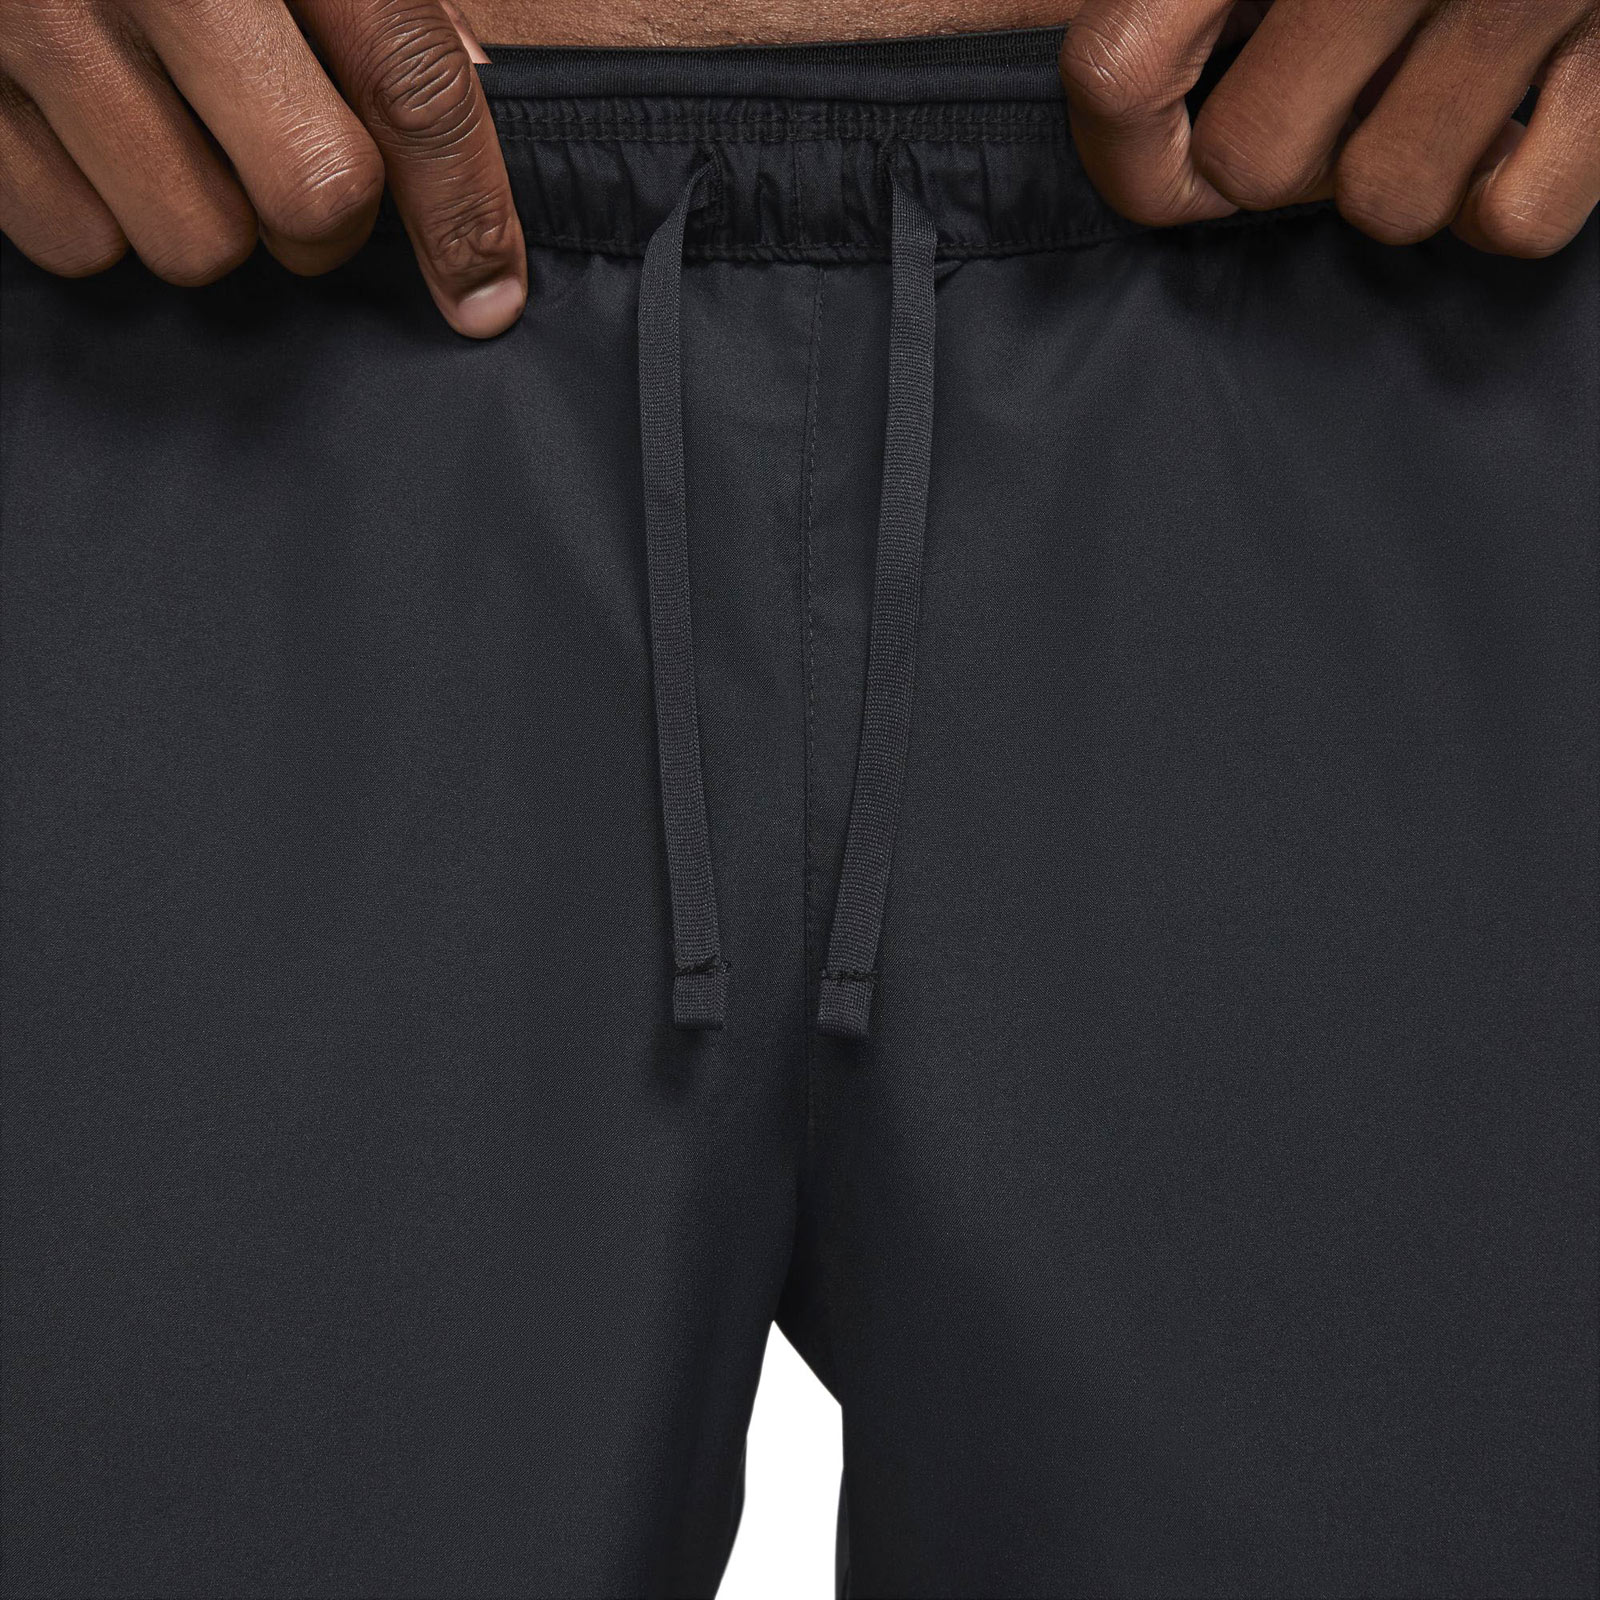 NIKE CHALLENGER MENS BRIEF-LINED RUNNING SHORTS